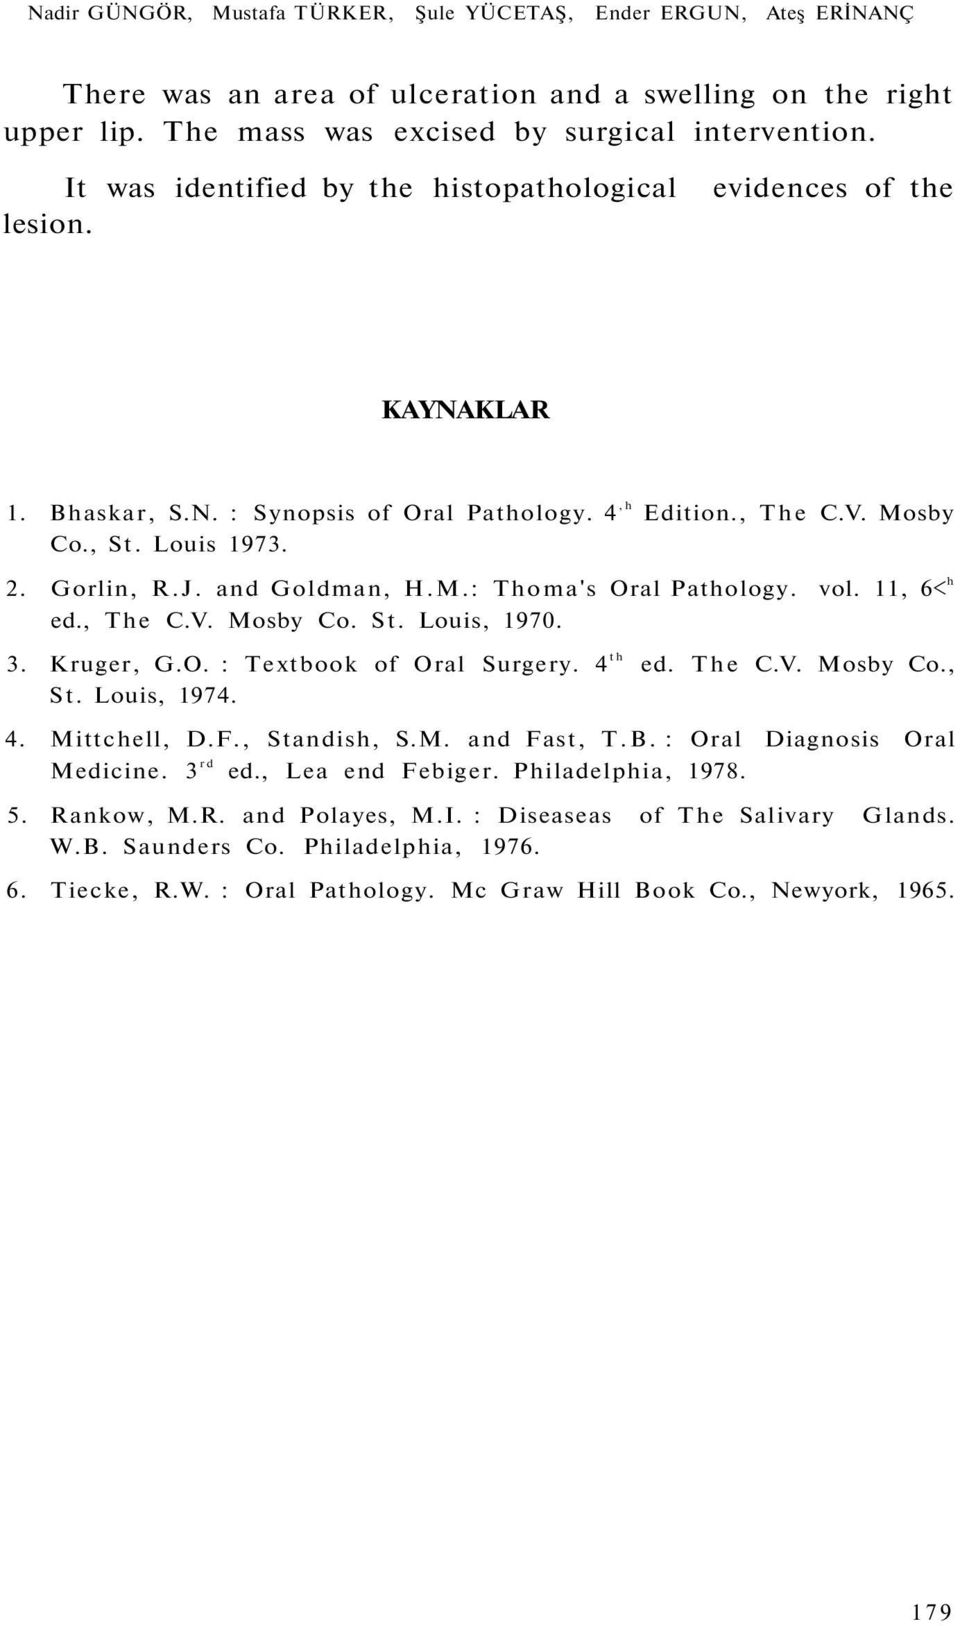 and Goldman, H.M.: Thoma's Oral Pathology. vol. 11, 6< h ed., The C.V. Mosby Co. St. Louis, 1970. 3. Kruger, G.O. : Textbook of Oral Surgery. 4 th ed. The C.V. Mosby Co., St. Louis, 1974. 4. Mittchell, D.